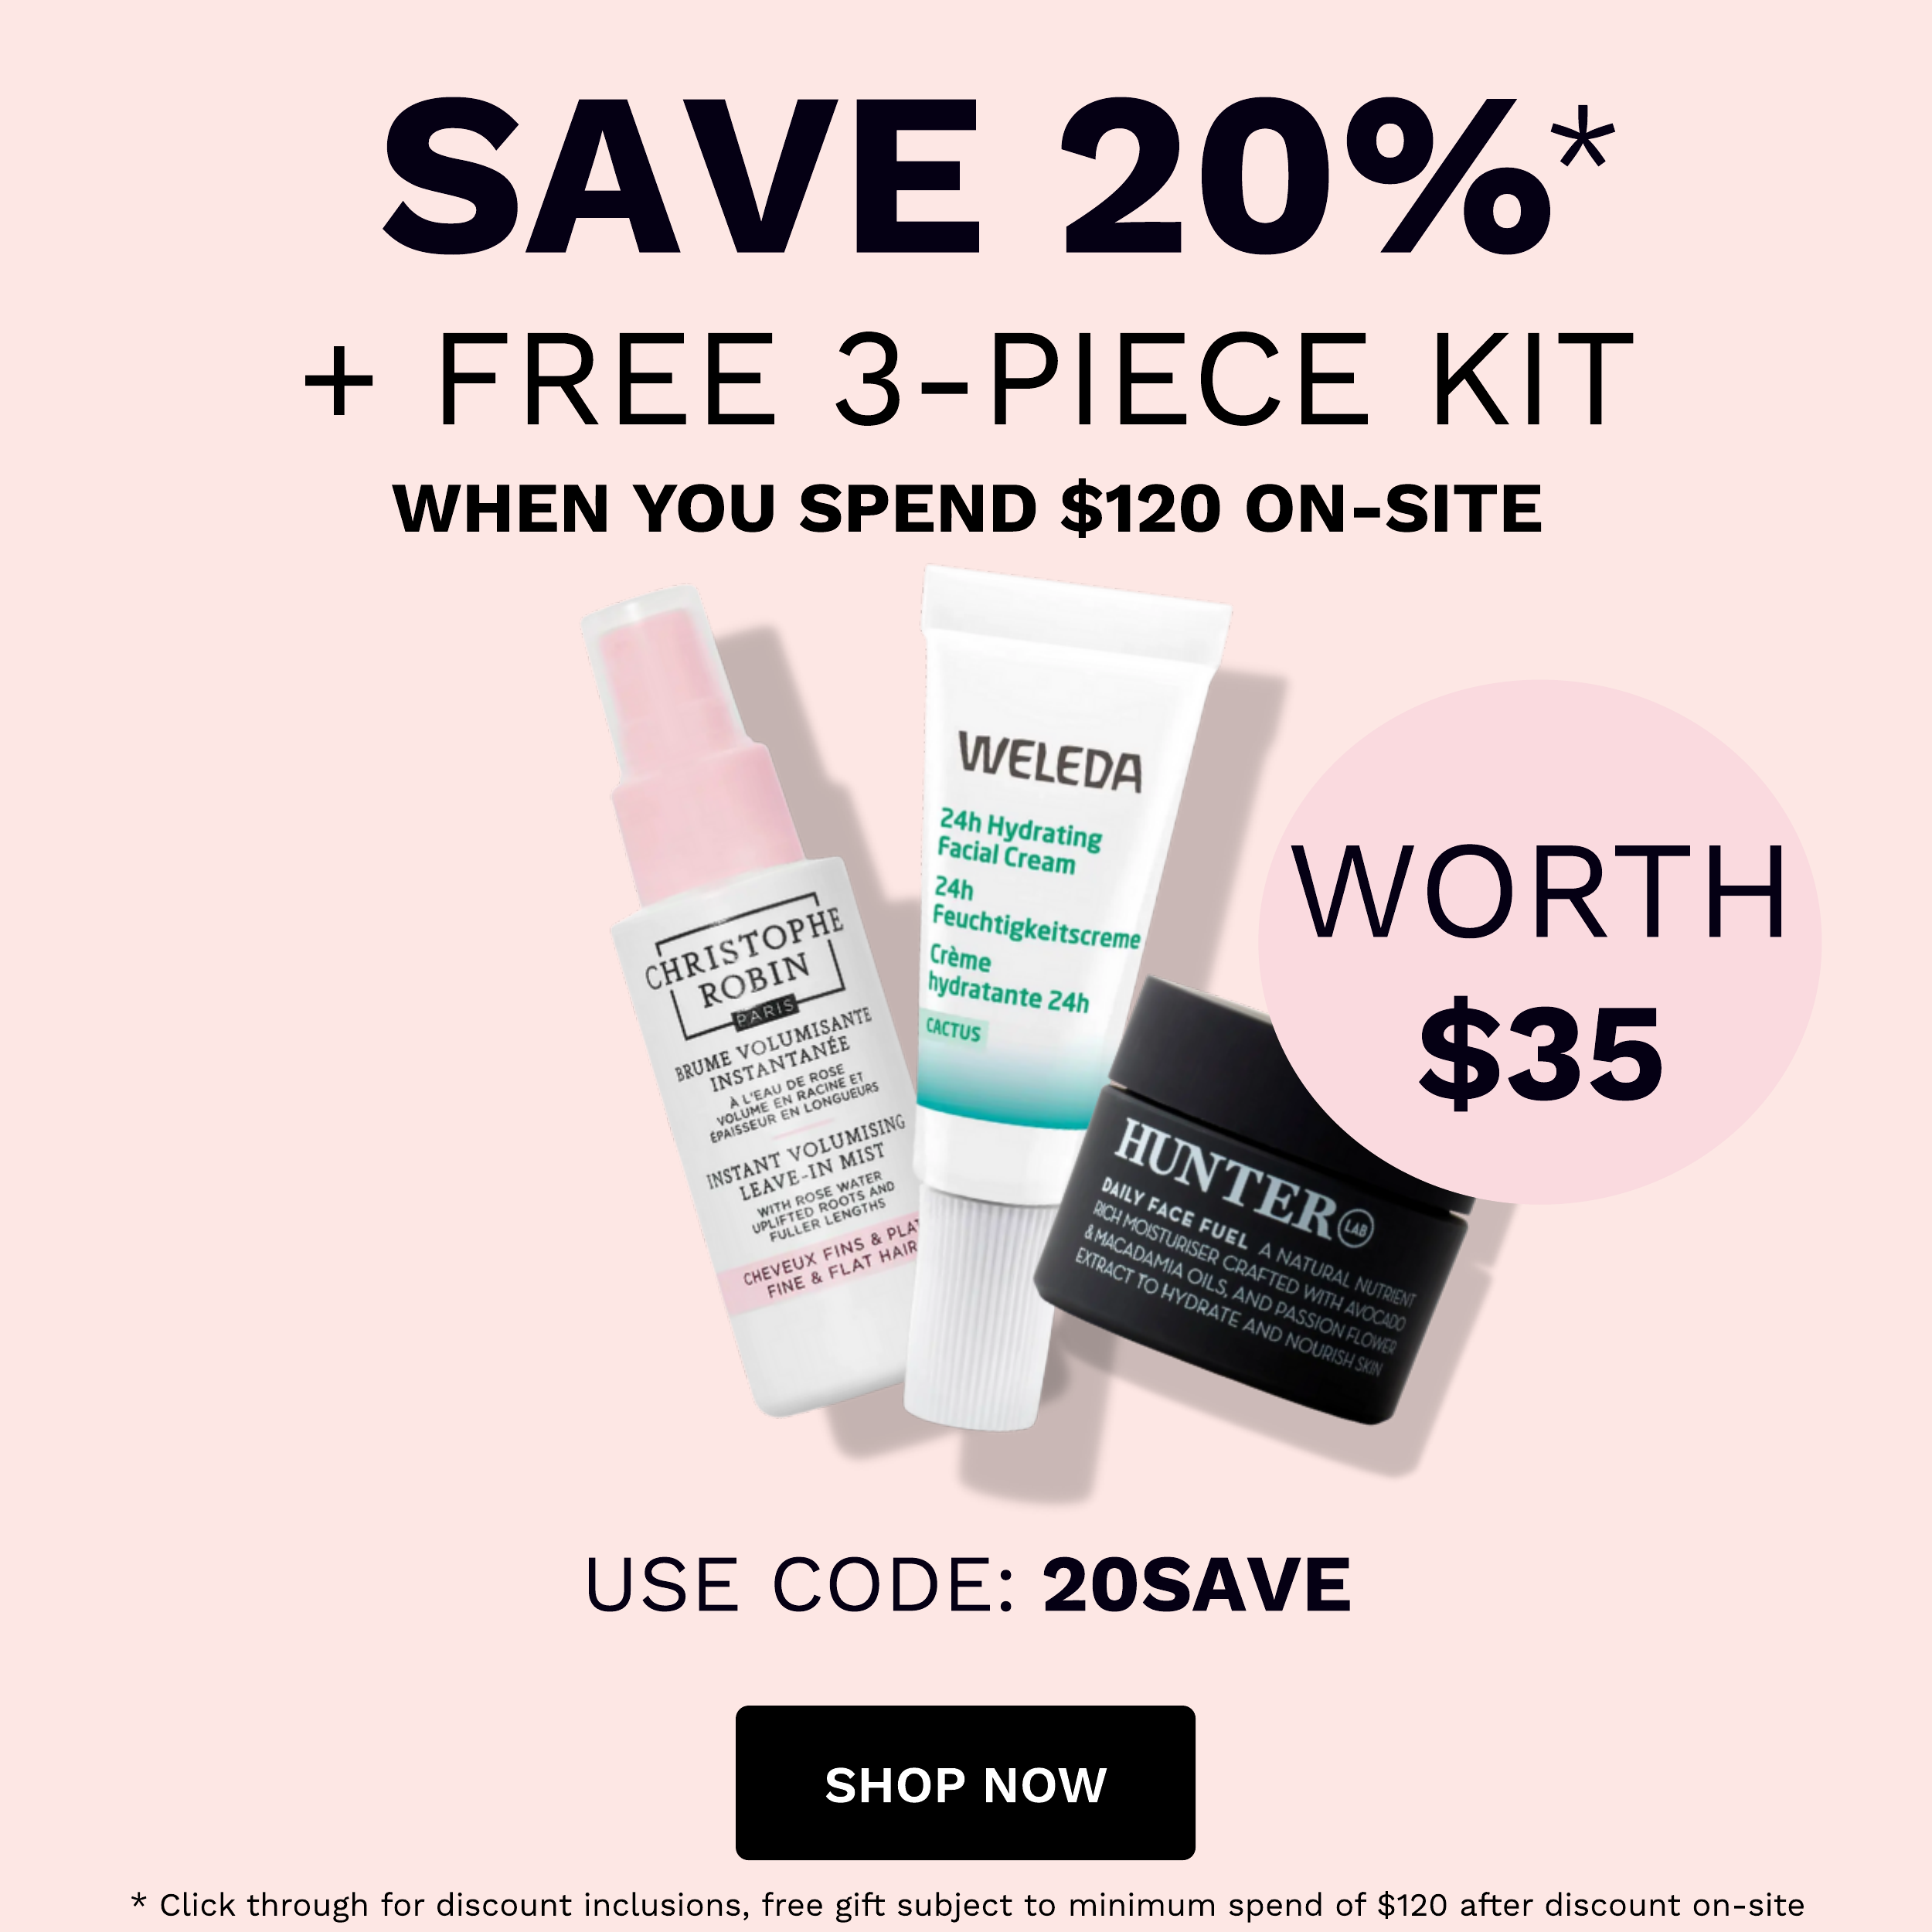 SAVE 20%" FREE 3-PIECE KIT WHEN YOU SPEND $120 ON-SITE WELEDA 29h Hydrating Facia Cream WORTH euch"ekeltscreme AR BN e rO Vdratante 24y, NTE O A PTINST L o e s JOLT LR W G USE CODE: 20SAVE SHOP NOW * Click through for discount inclusions, free gift subject to minimum spend of $120 after discount on-site 